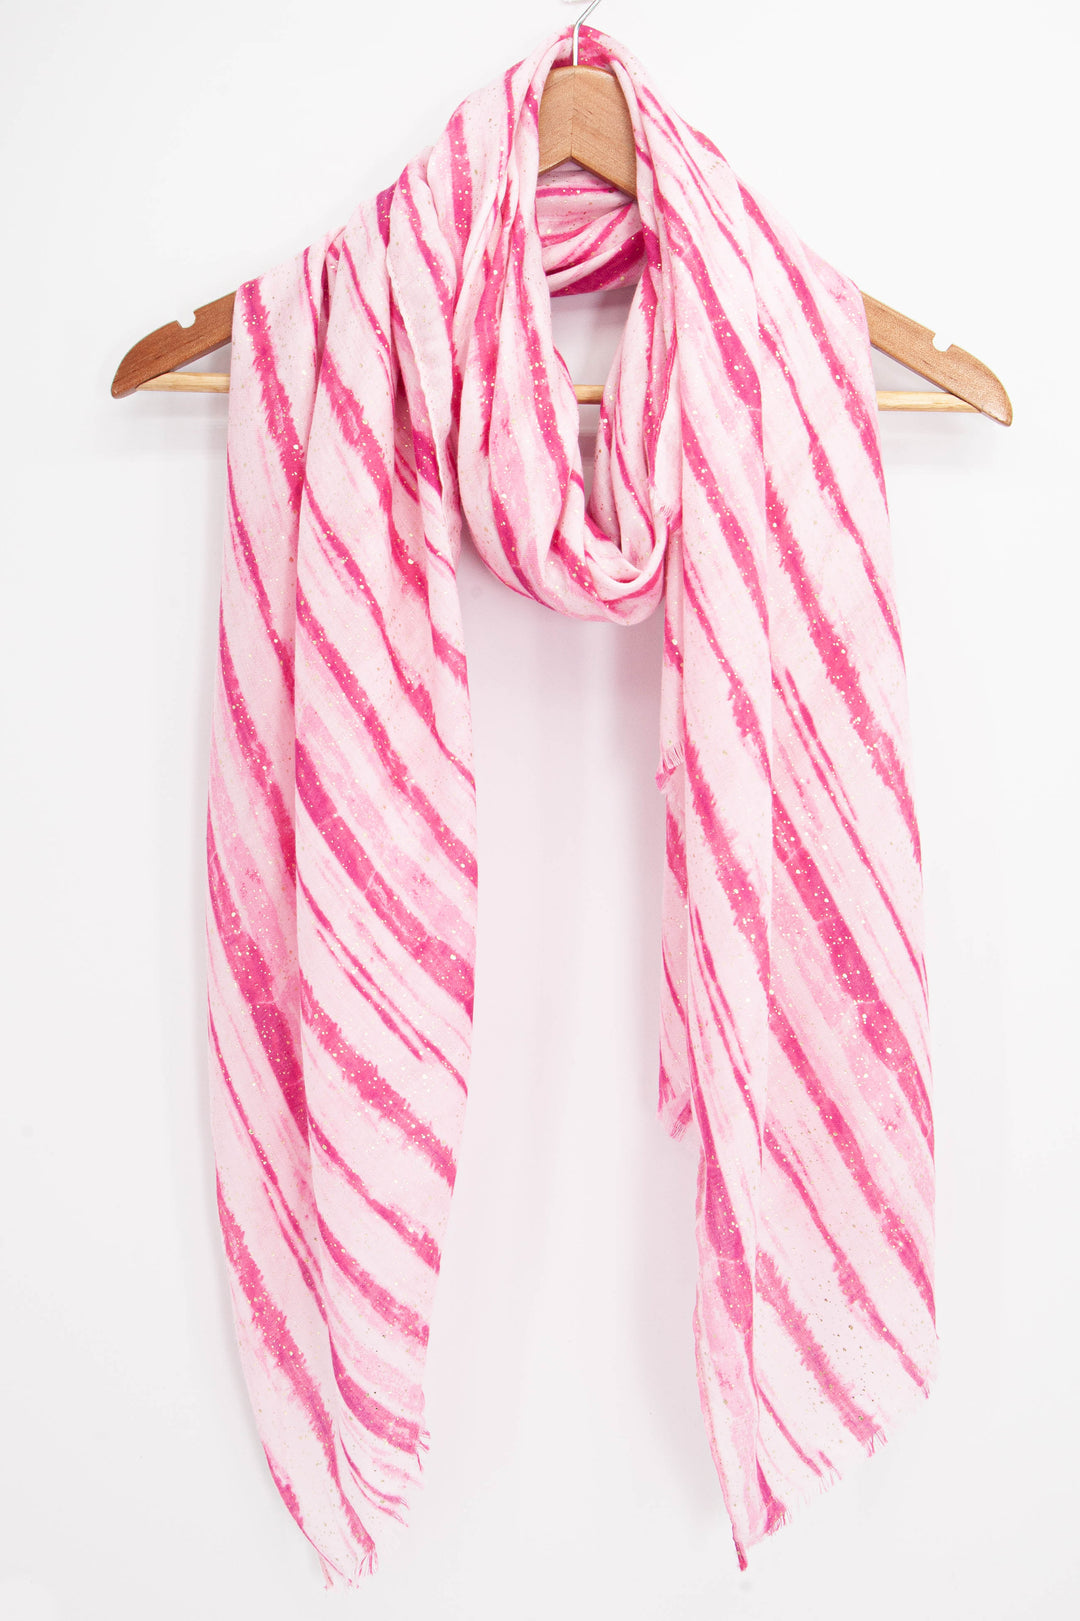 pink striped scarf with gold foil flecks draped around a coat hanger